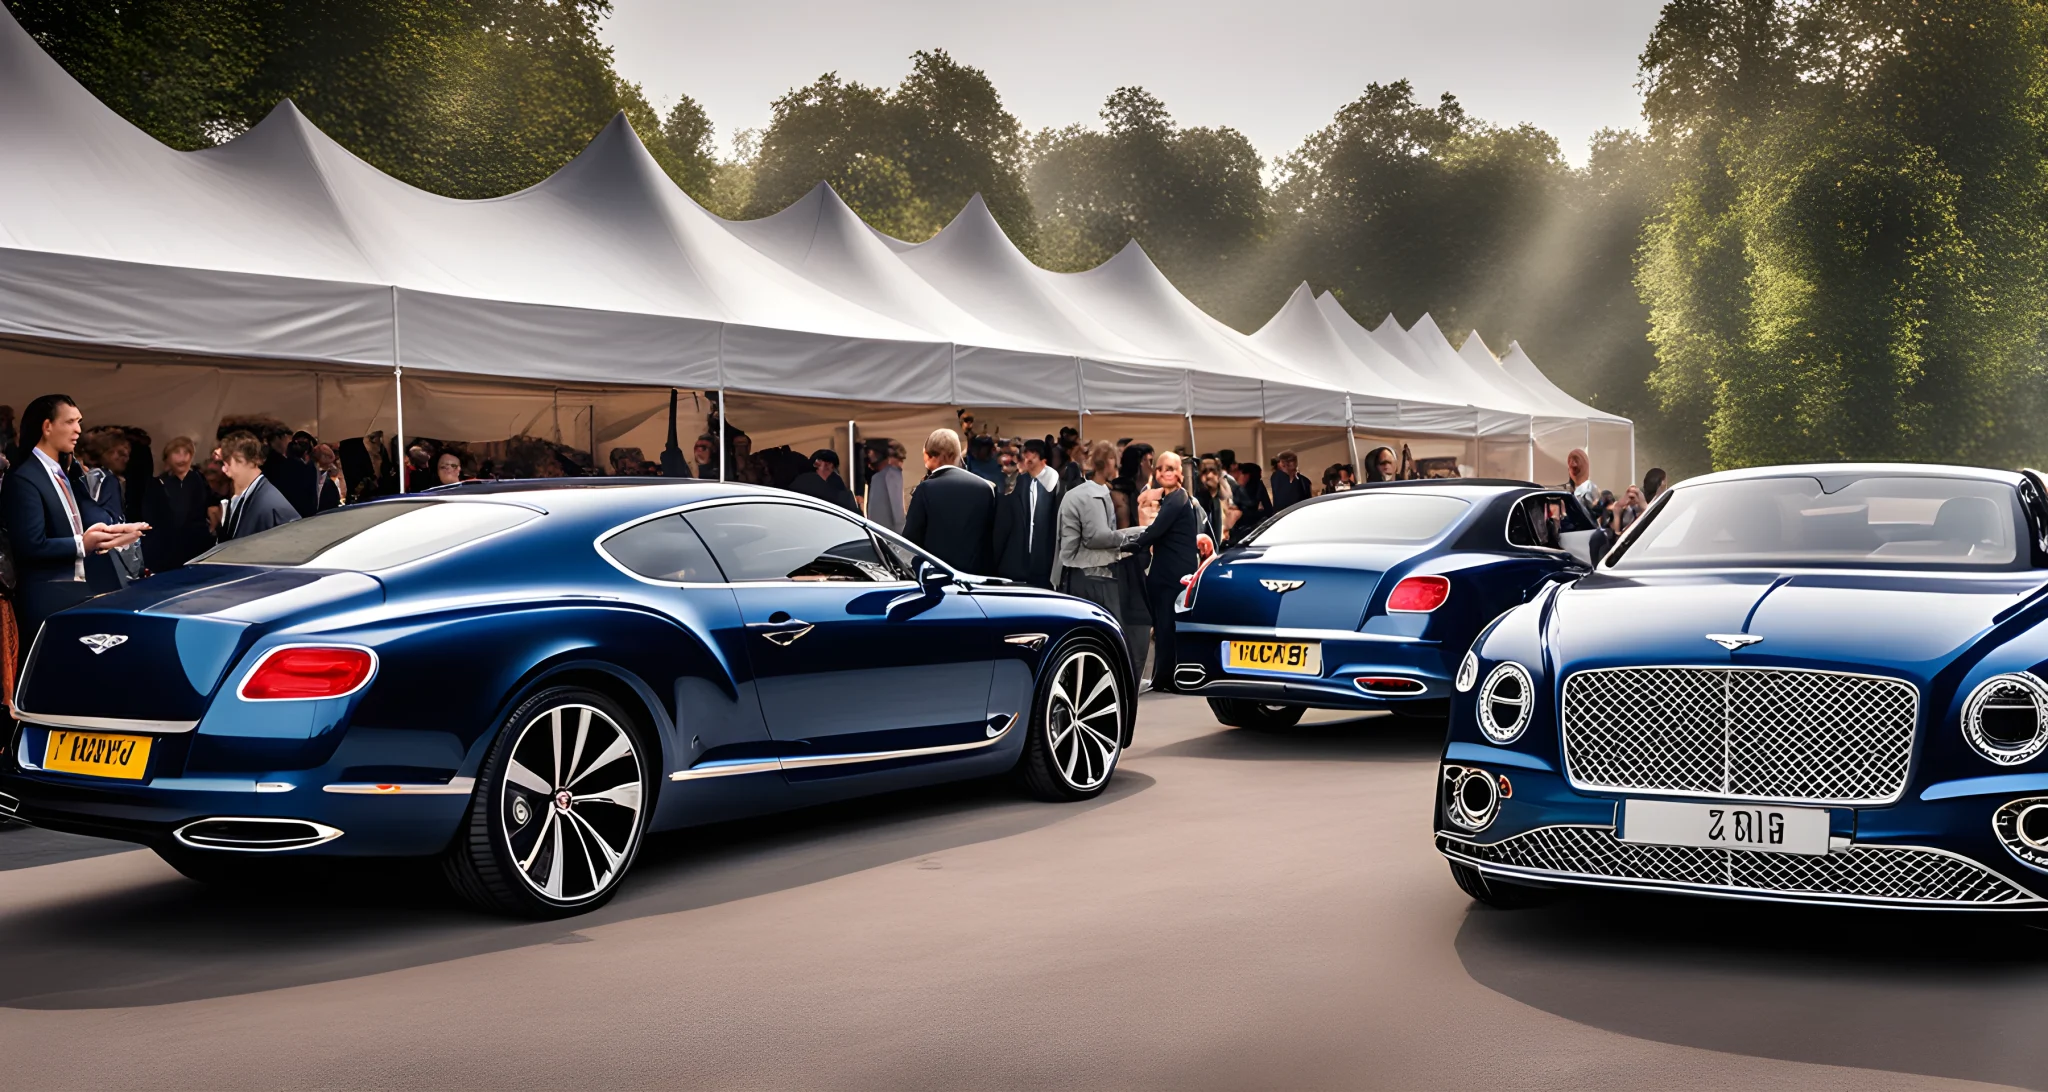 The image shows a lineup of sleek, luxury Bentley vehicles parked at a car event. Attendees are seen mingling and admiring the cars.